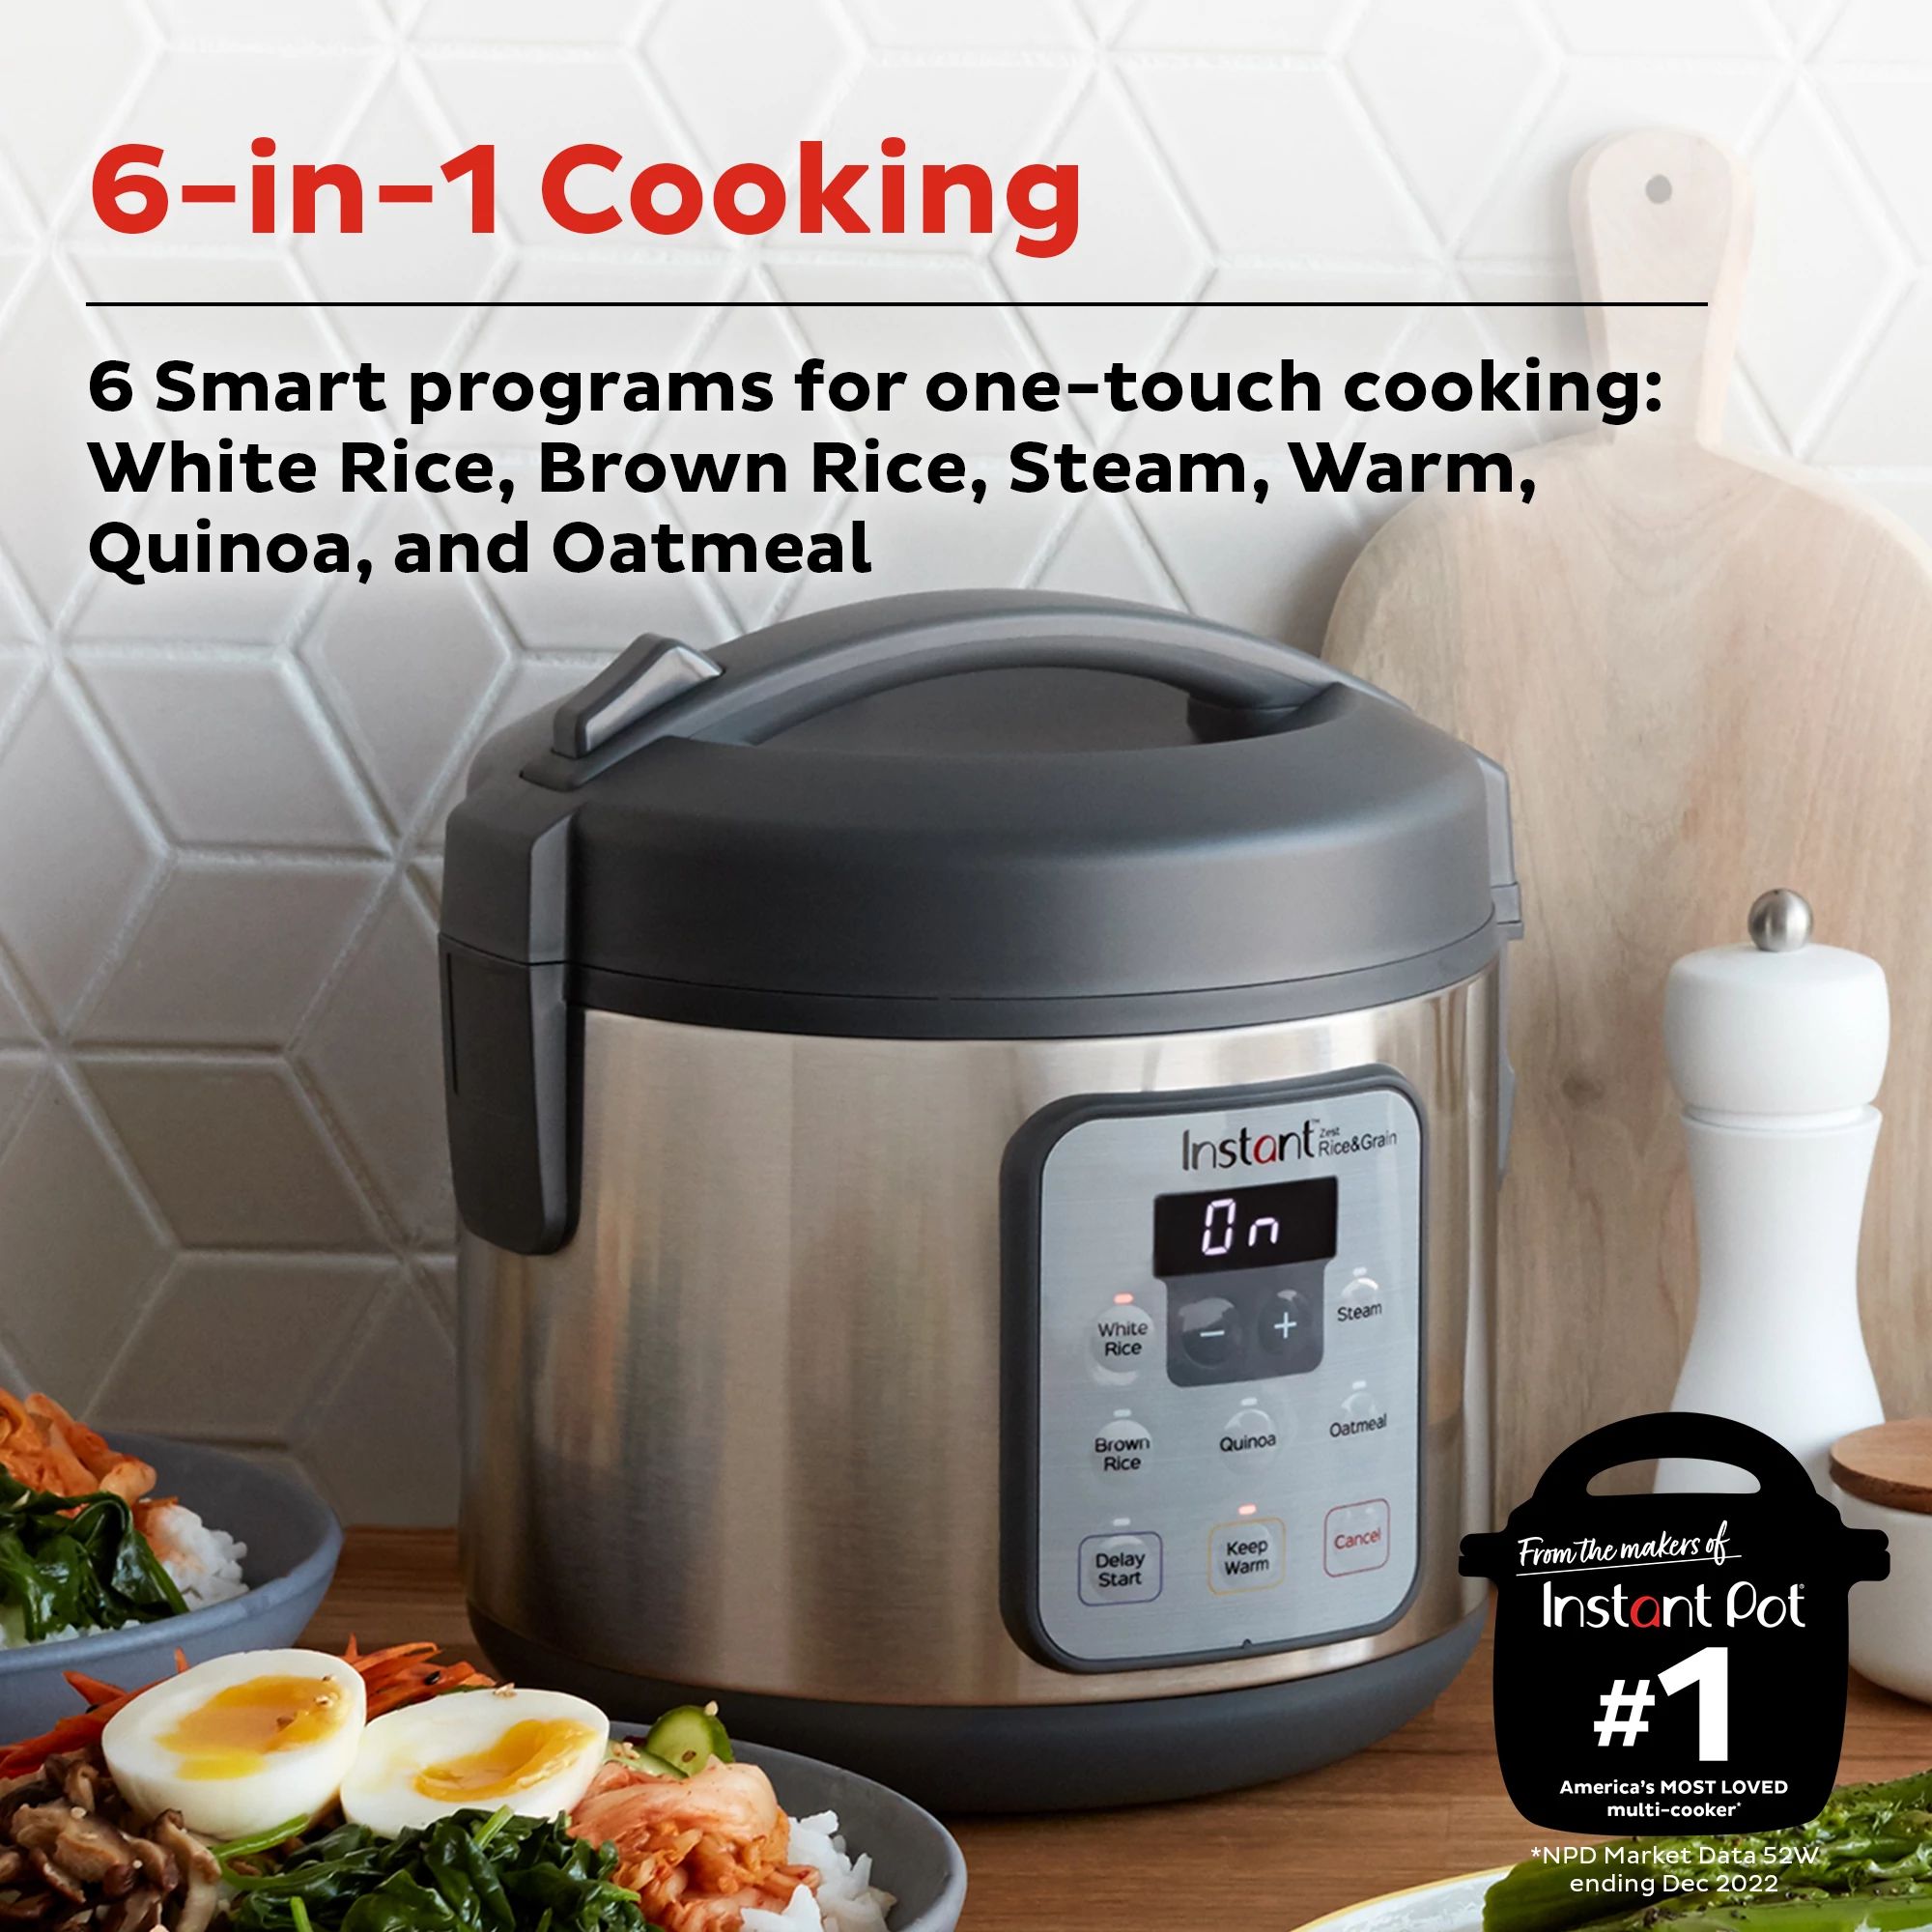 https://embed.widencdn.net/img/worldkitchen/exl7imq7a6/2000px/IB_140-5000-01_Zest_8-cup_Rice-Cooker_ATF_Square_Tile2.jpeg